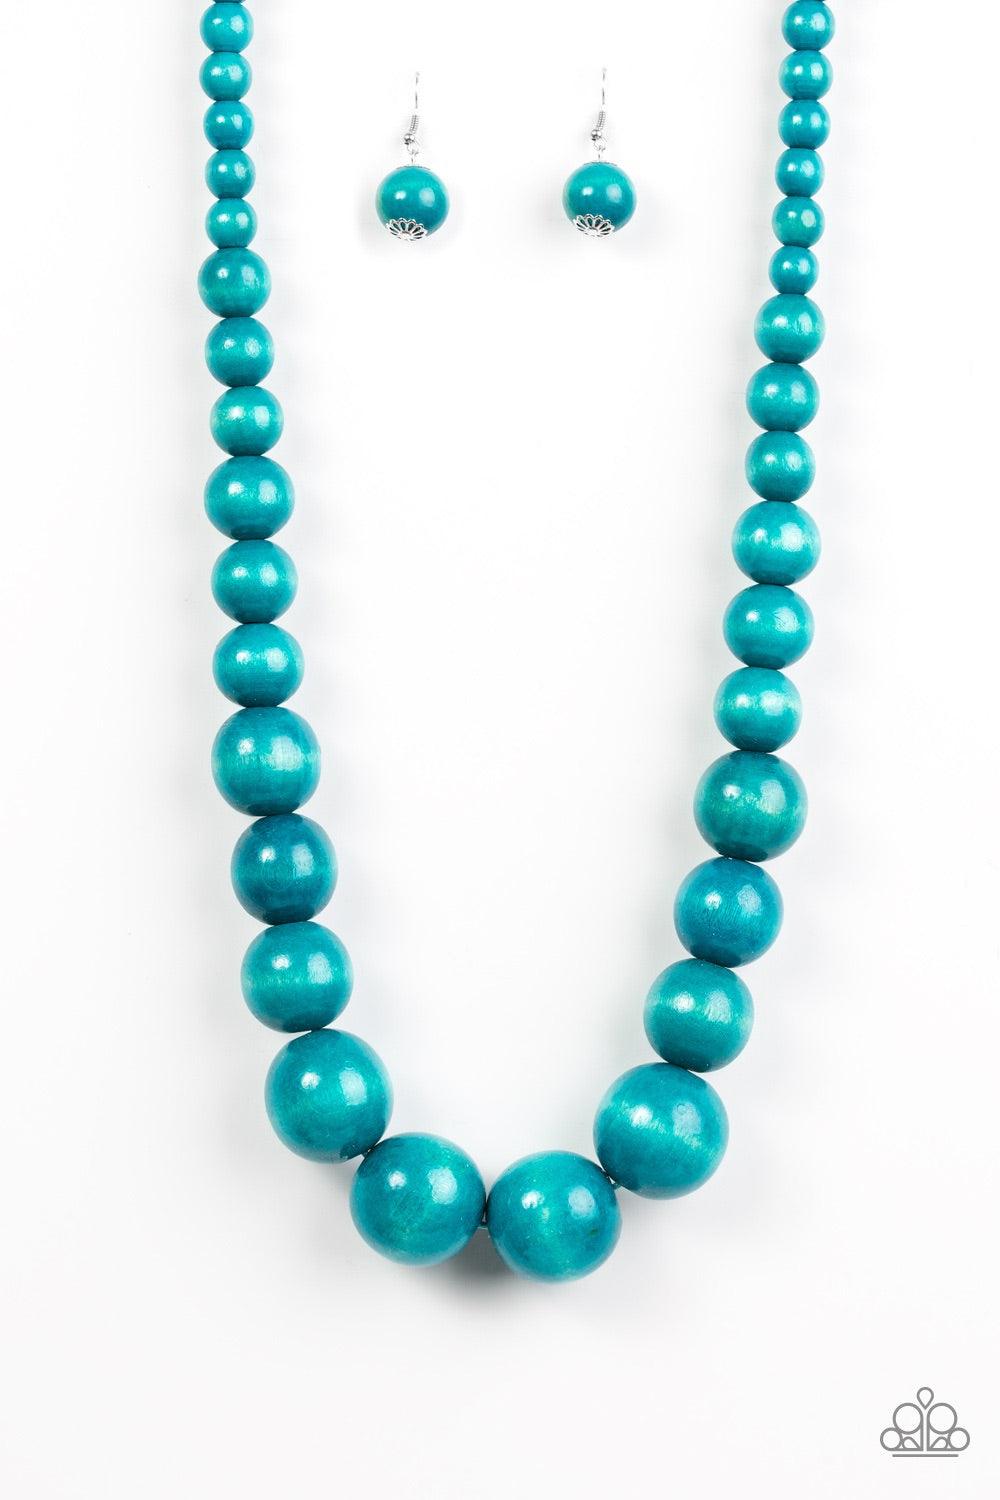 Paparazzi Accessories Effortlessly Everglades - Blue Gradually increasing in size near the center, refreshing blue wooden beads are threaded along a blue string for a summery look. Features an adjustable sliding knot closure. Jewelry